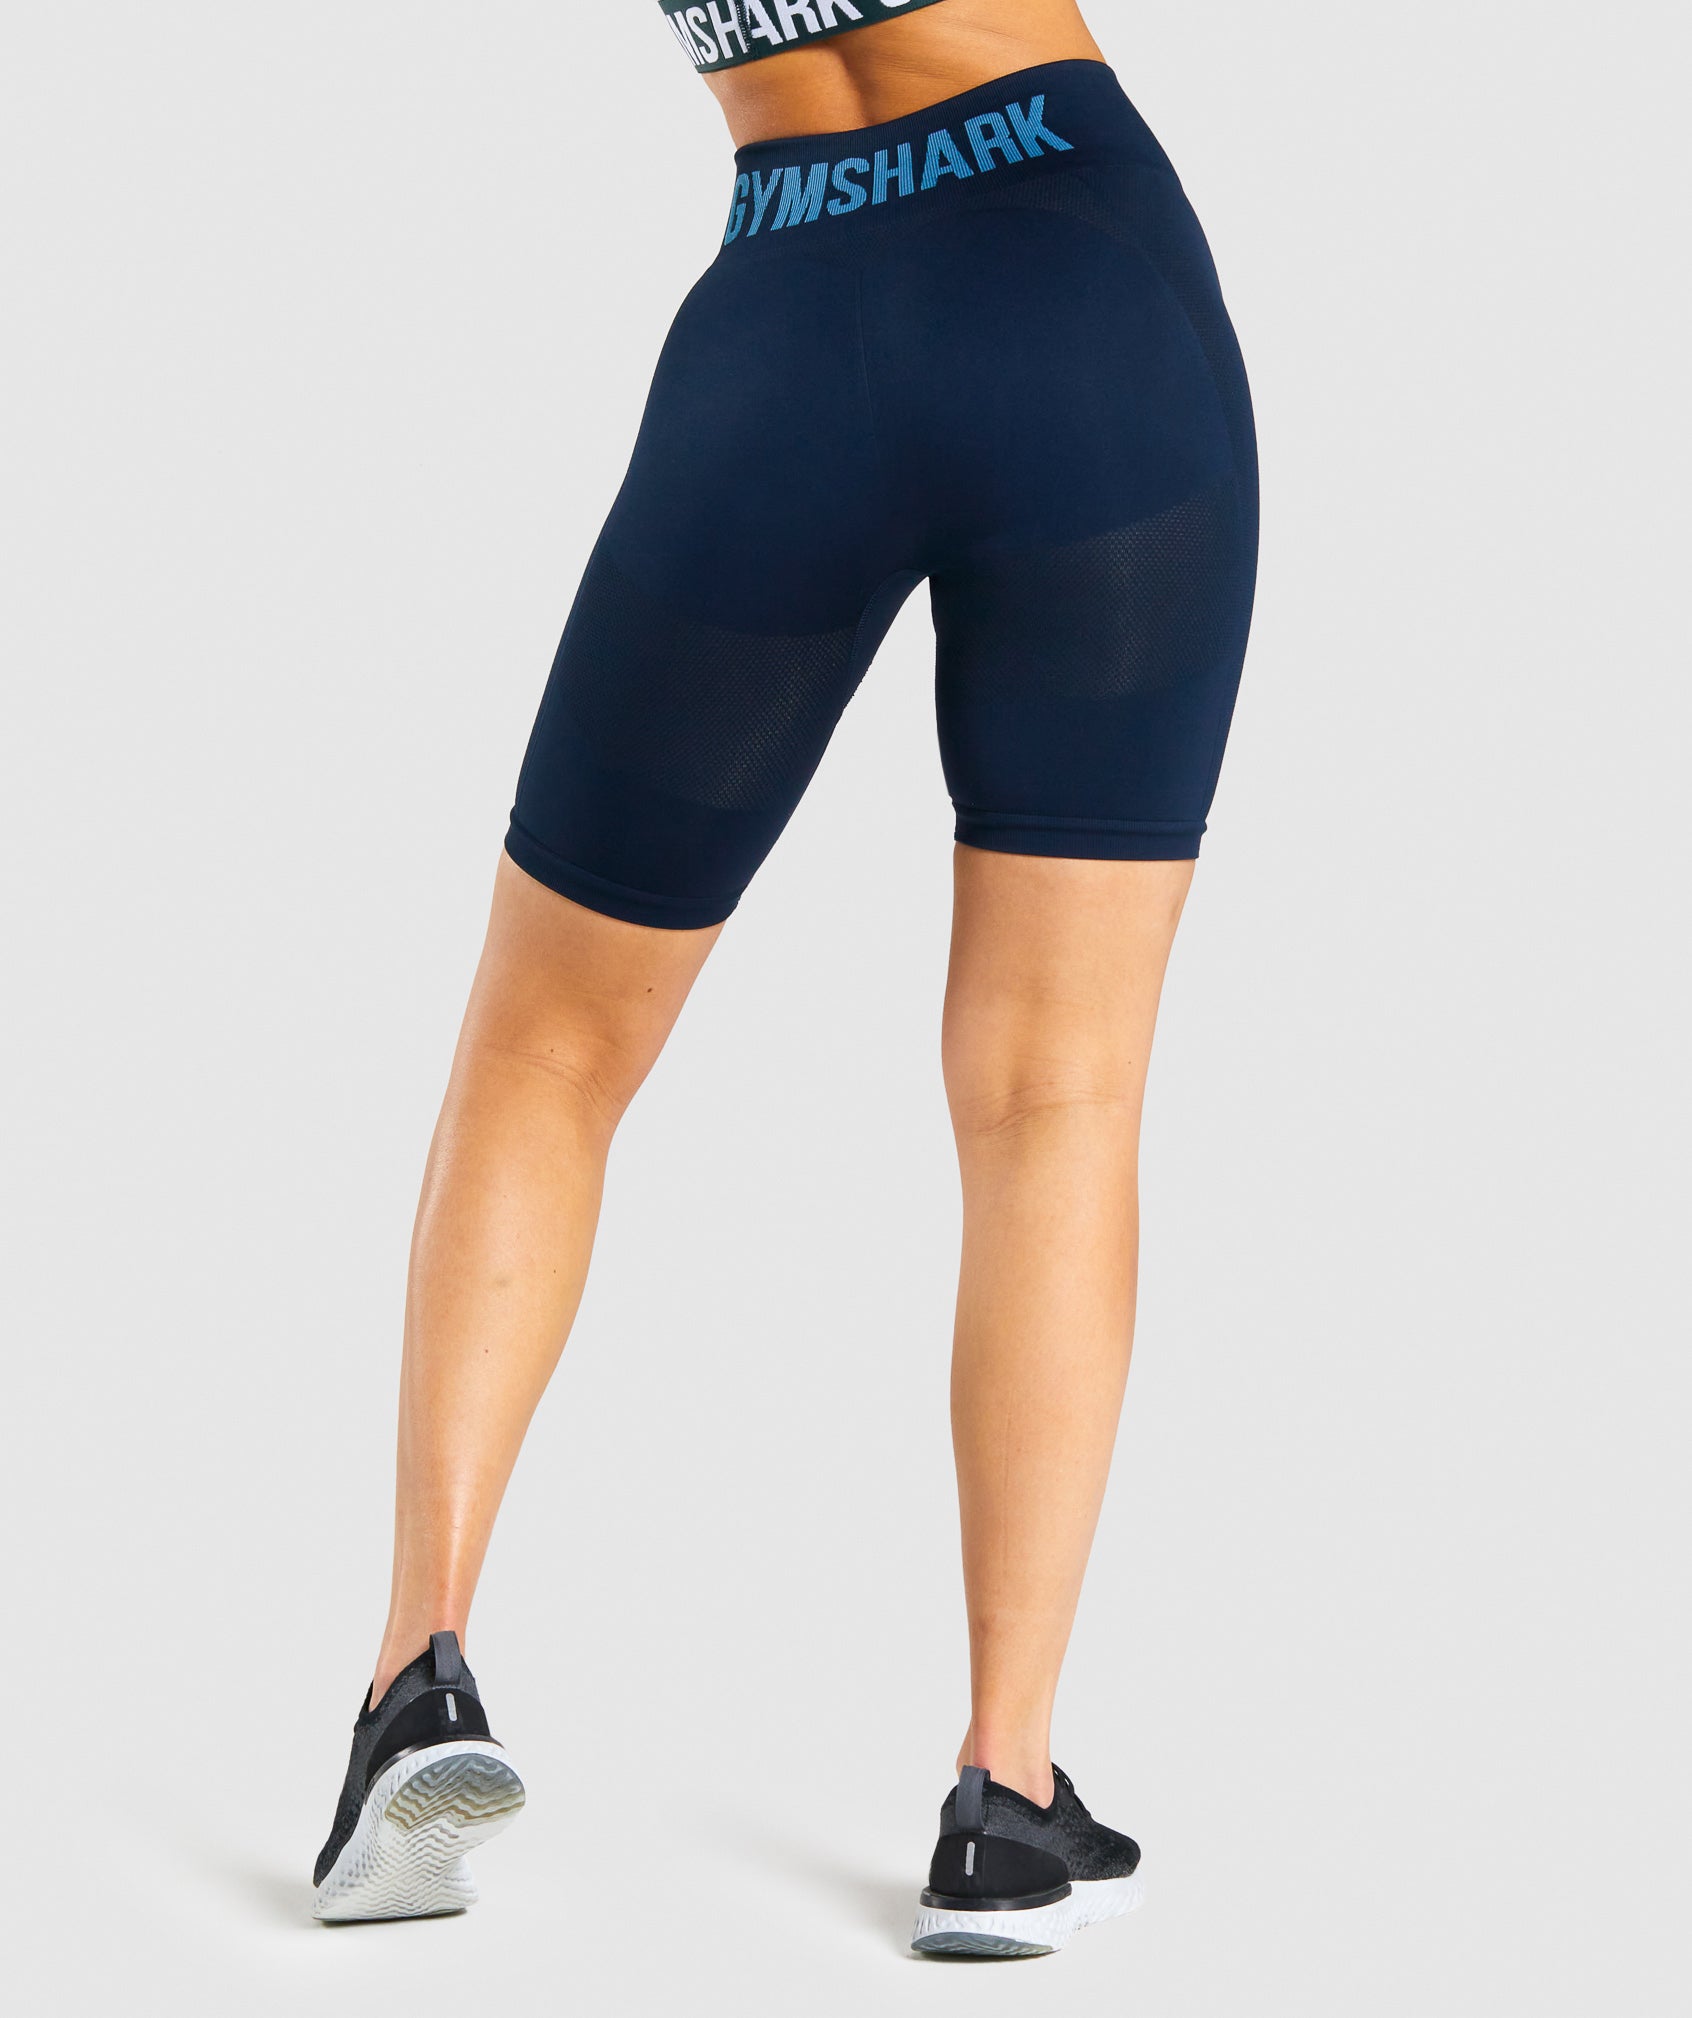 Flex Cycling Shorts in Navy - view 3